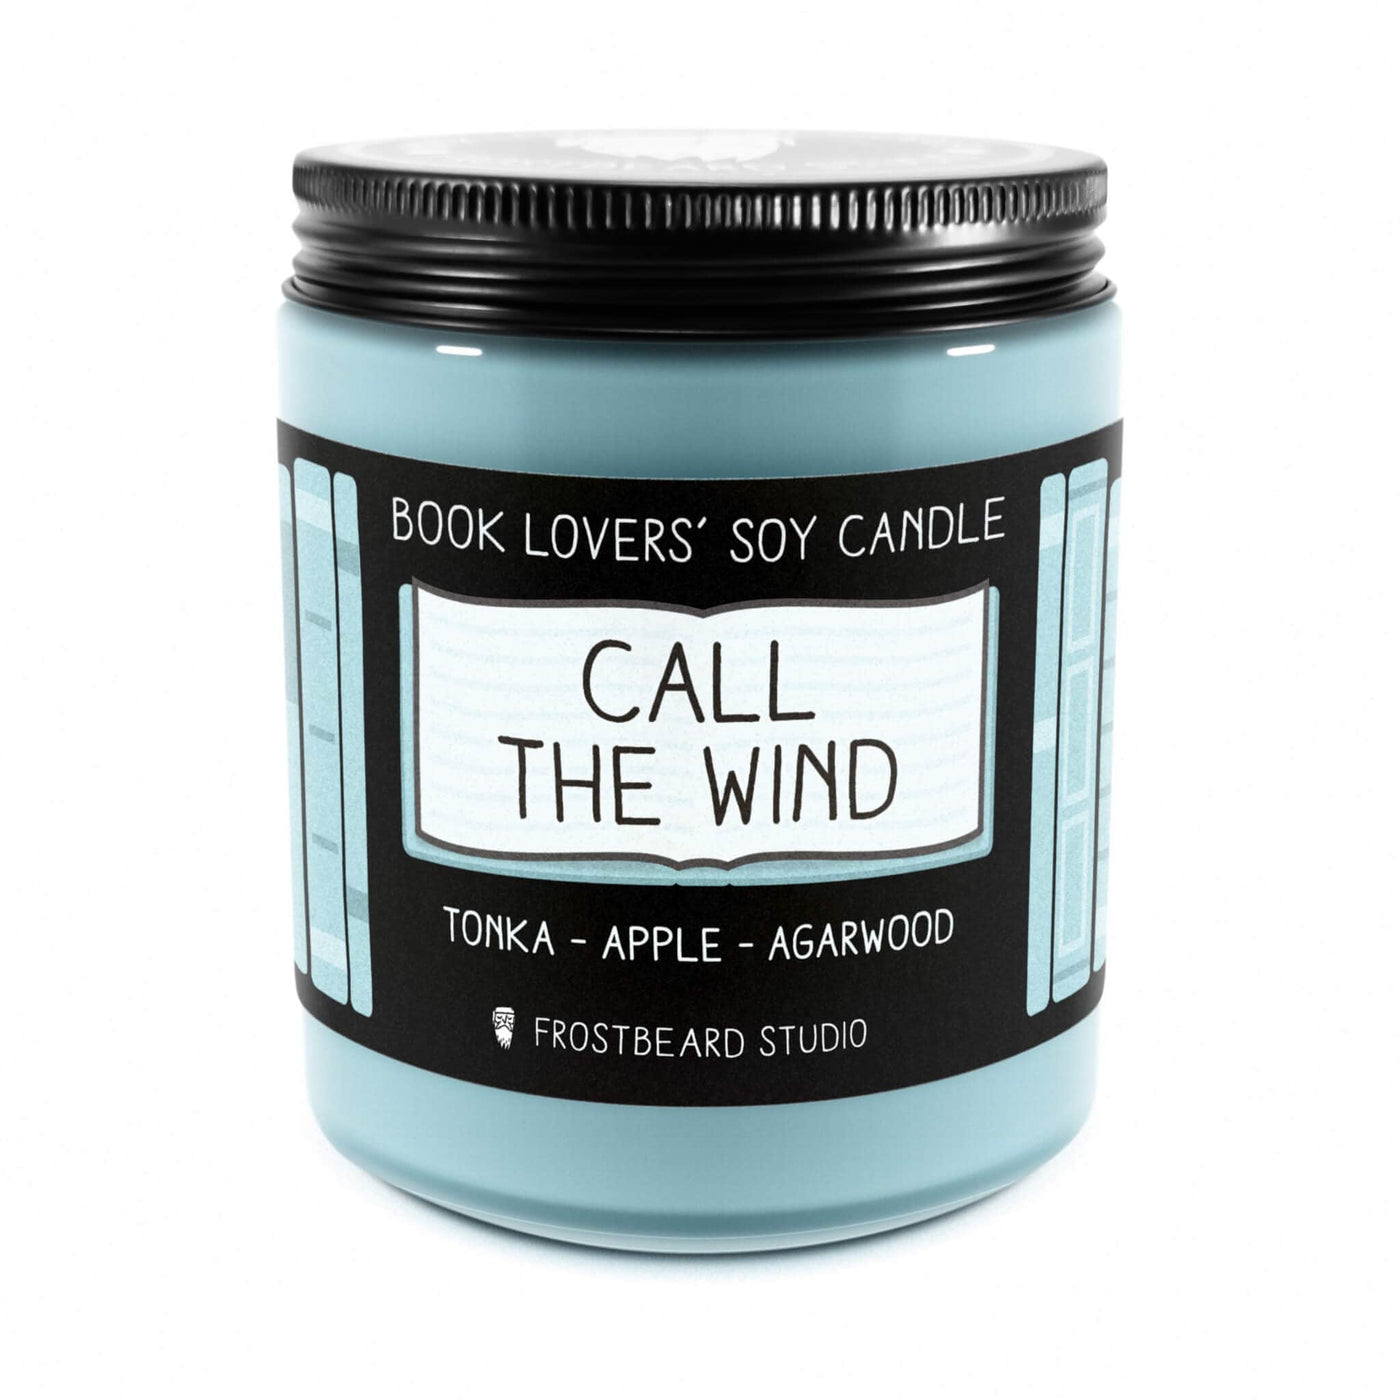 Call the Wind - 8 oz Jar - Book Lovers' Soy Candle - Frostbeard Studio